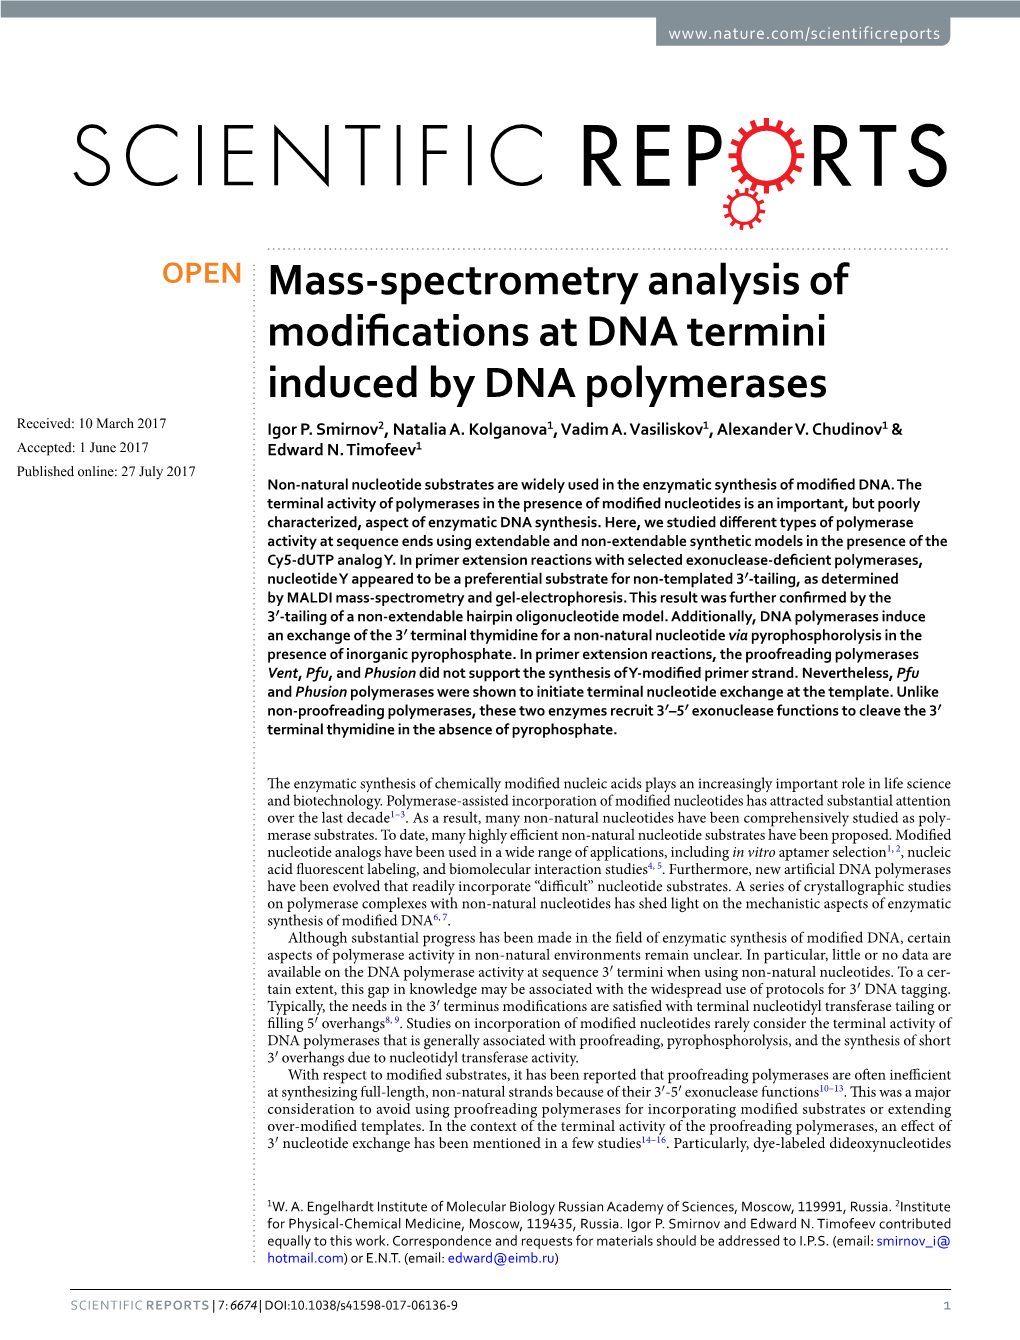 Mass-Spectrometry Analysis of Modifications at DNA Termini